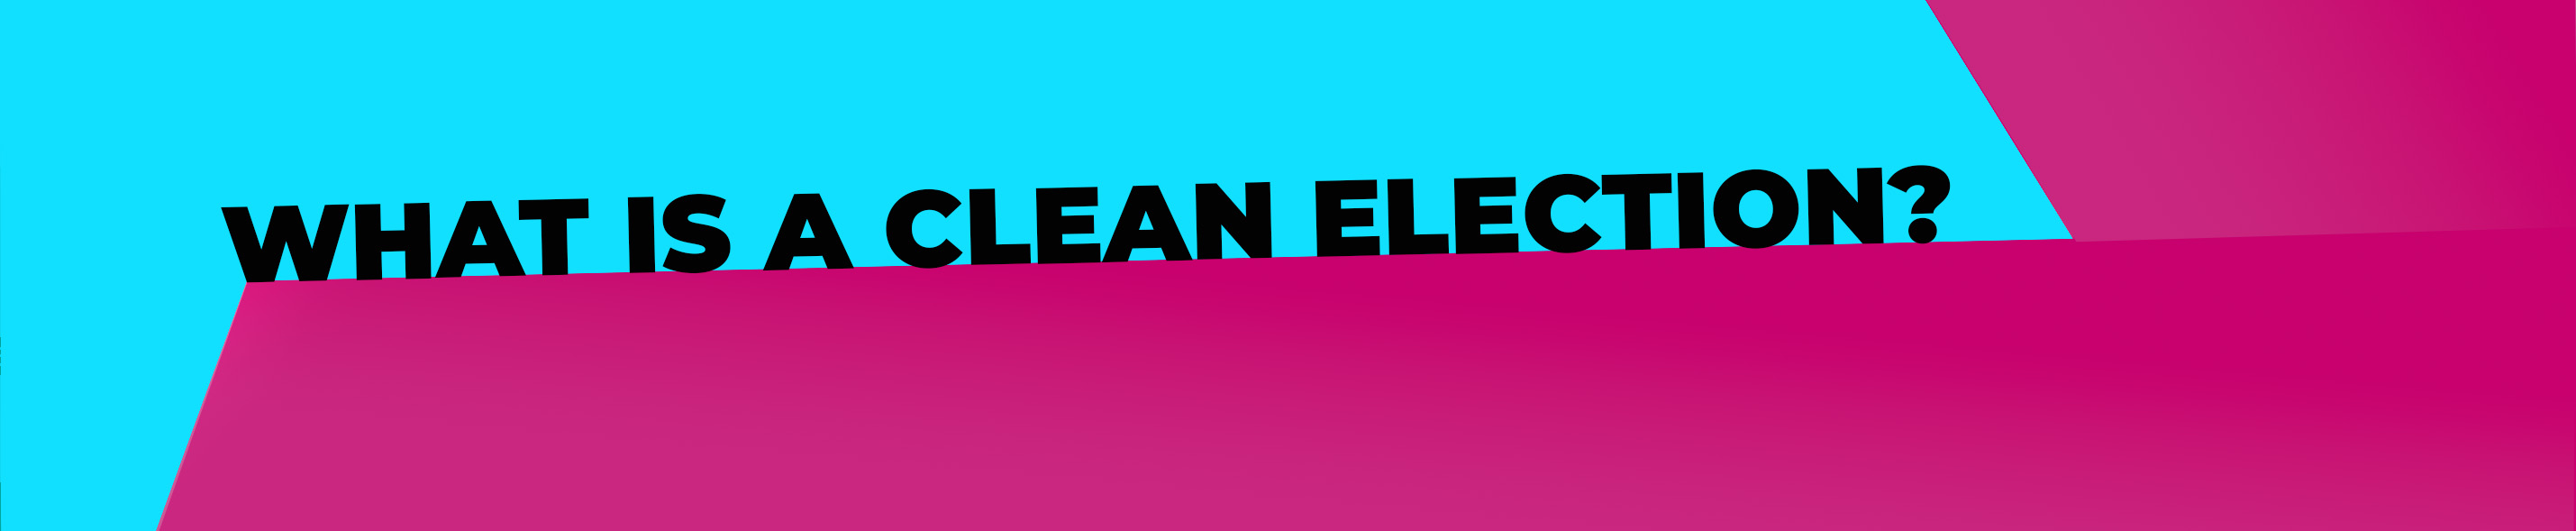 What is a Clean Election?